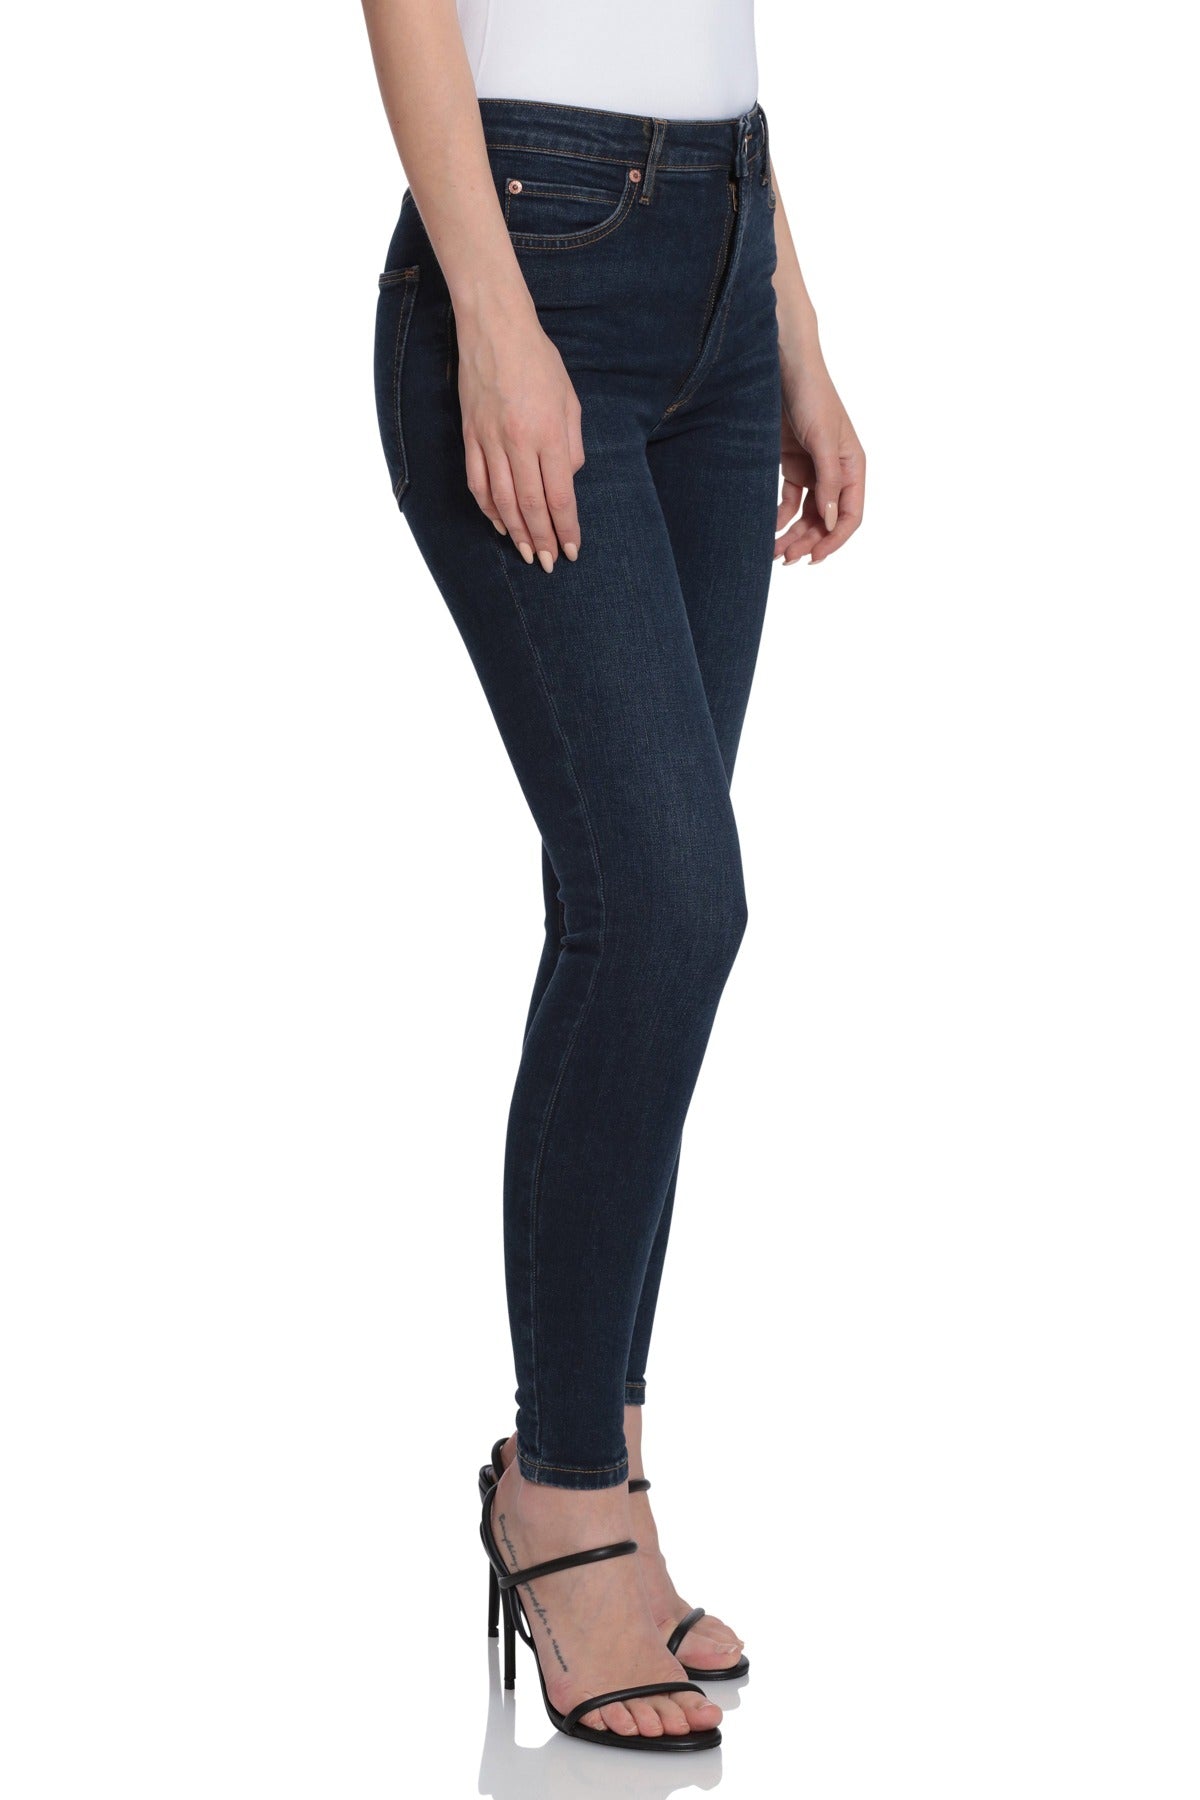 Buy Denim for Women Online at Best Prices - Westside – Page 2